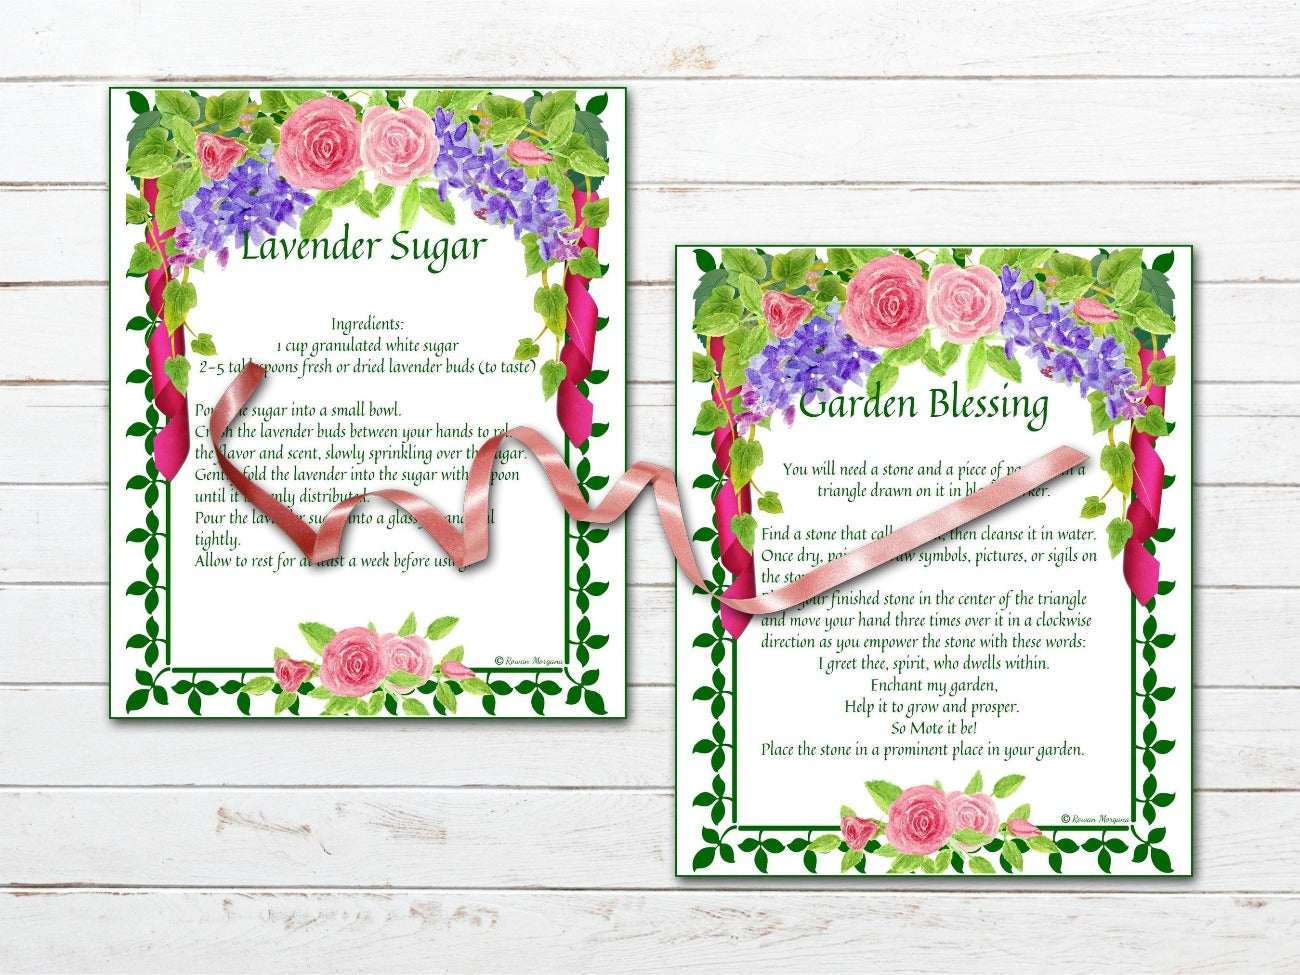 BELTANE SPELL CARDS, Have a white background, green ivy border and pretty pastel florals at the top and bottom. Lavender Sugar recipe and Garden Blessing cards are featured - Morgana Magick Spell